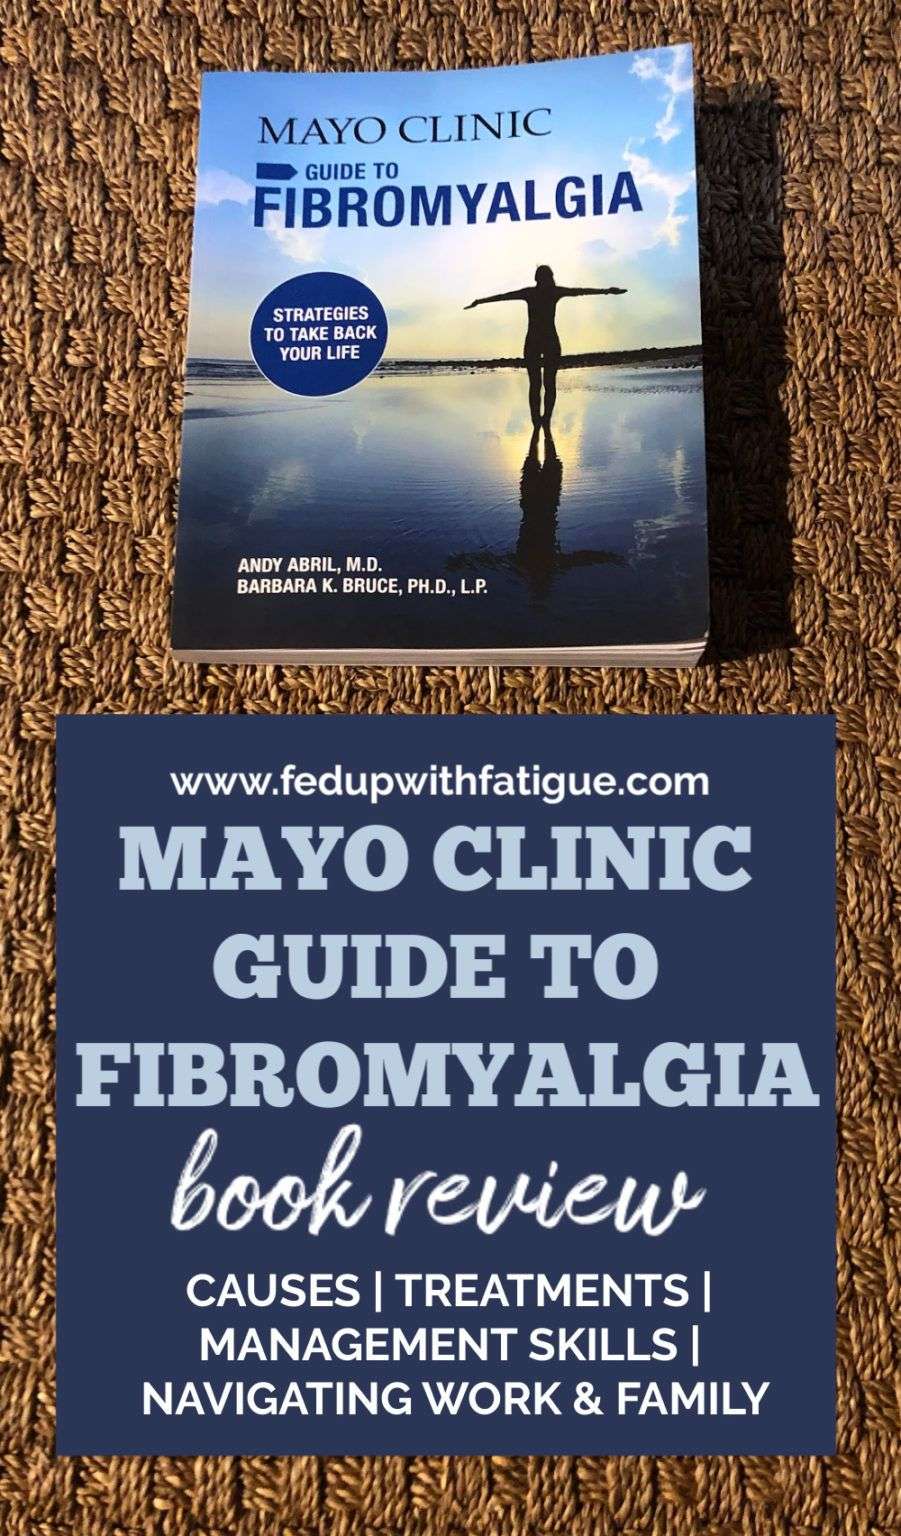 Mayo Clinic Guide to Fibromyalgia book review ...